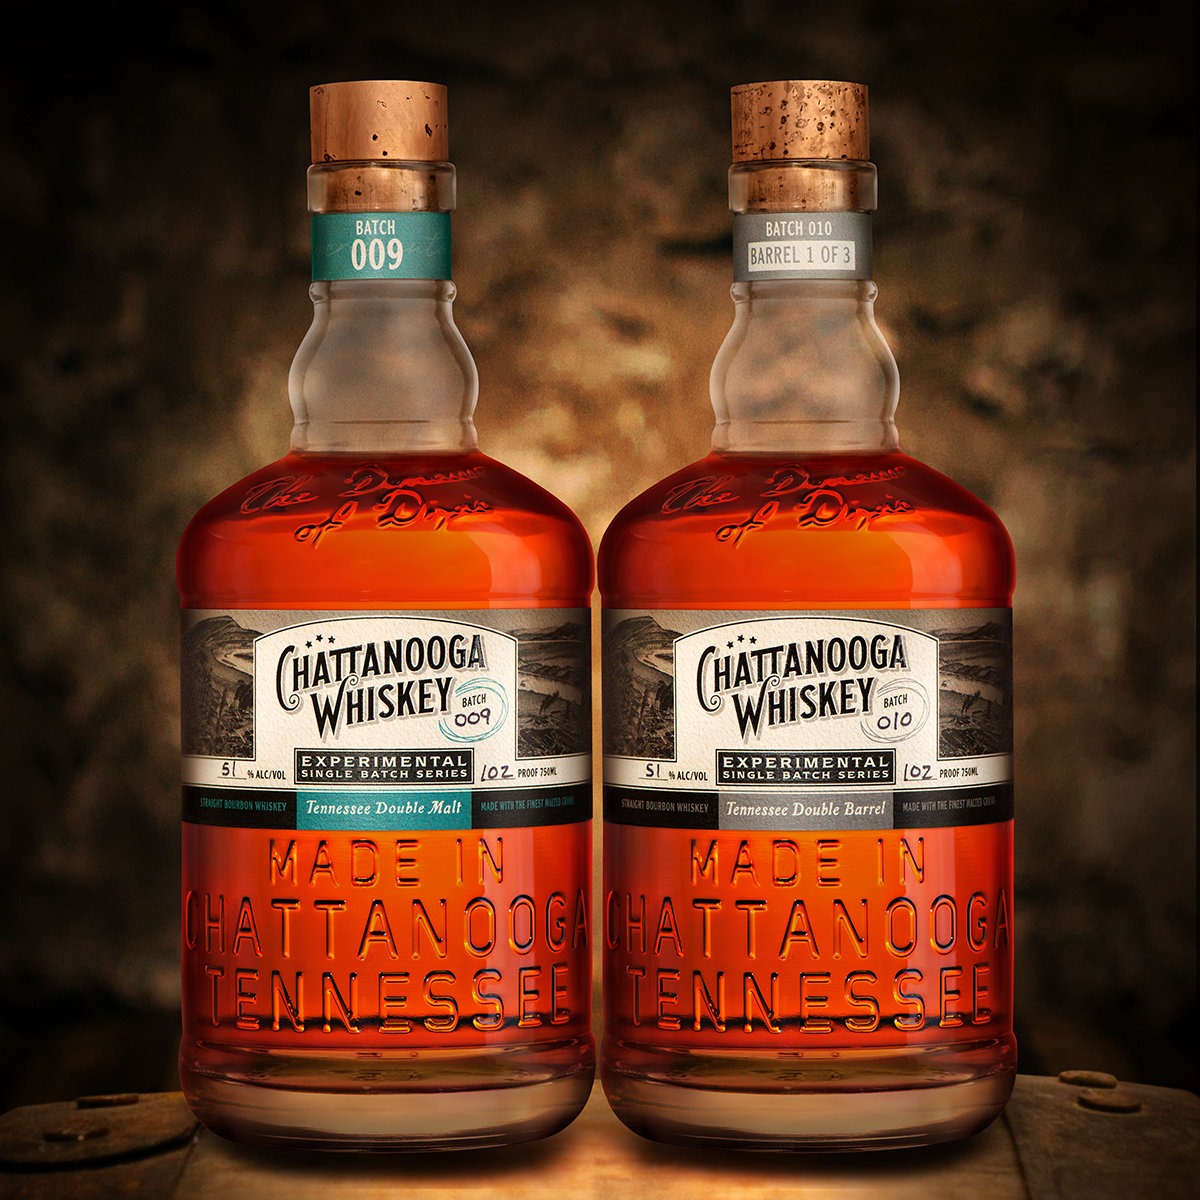 Announcing the newest additions to our Award Winning Distiller's Experimental Series: Batch 009 & 010!